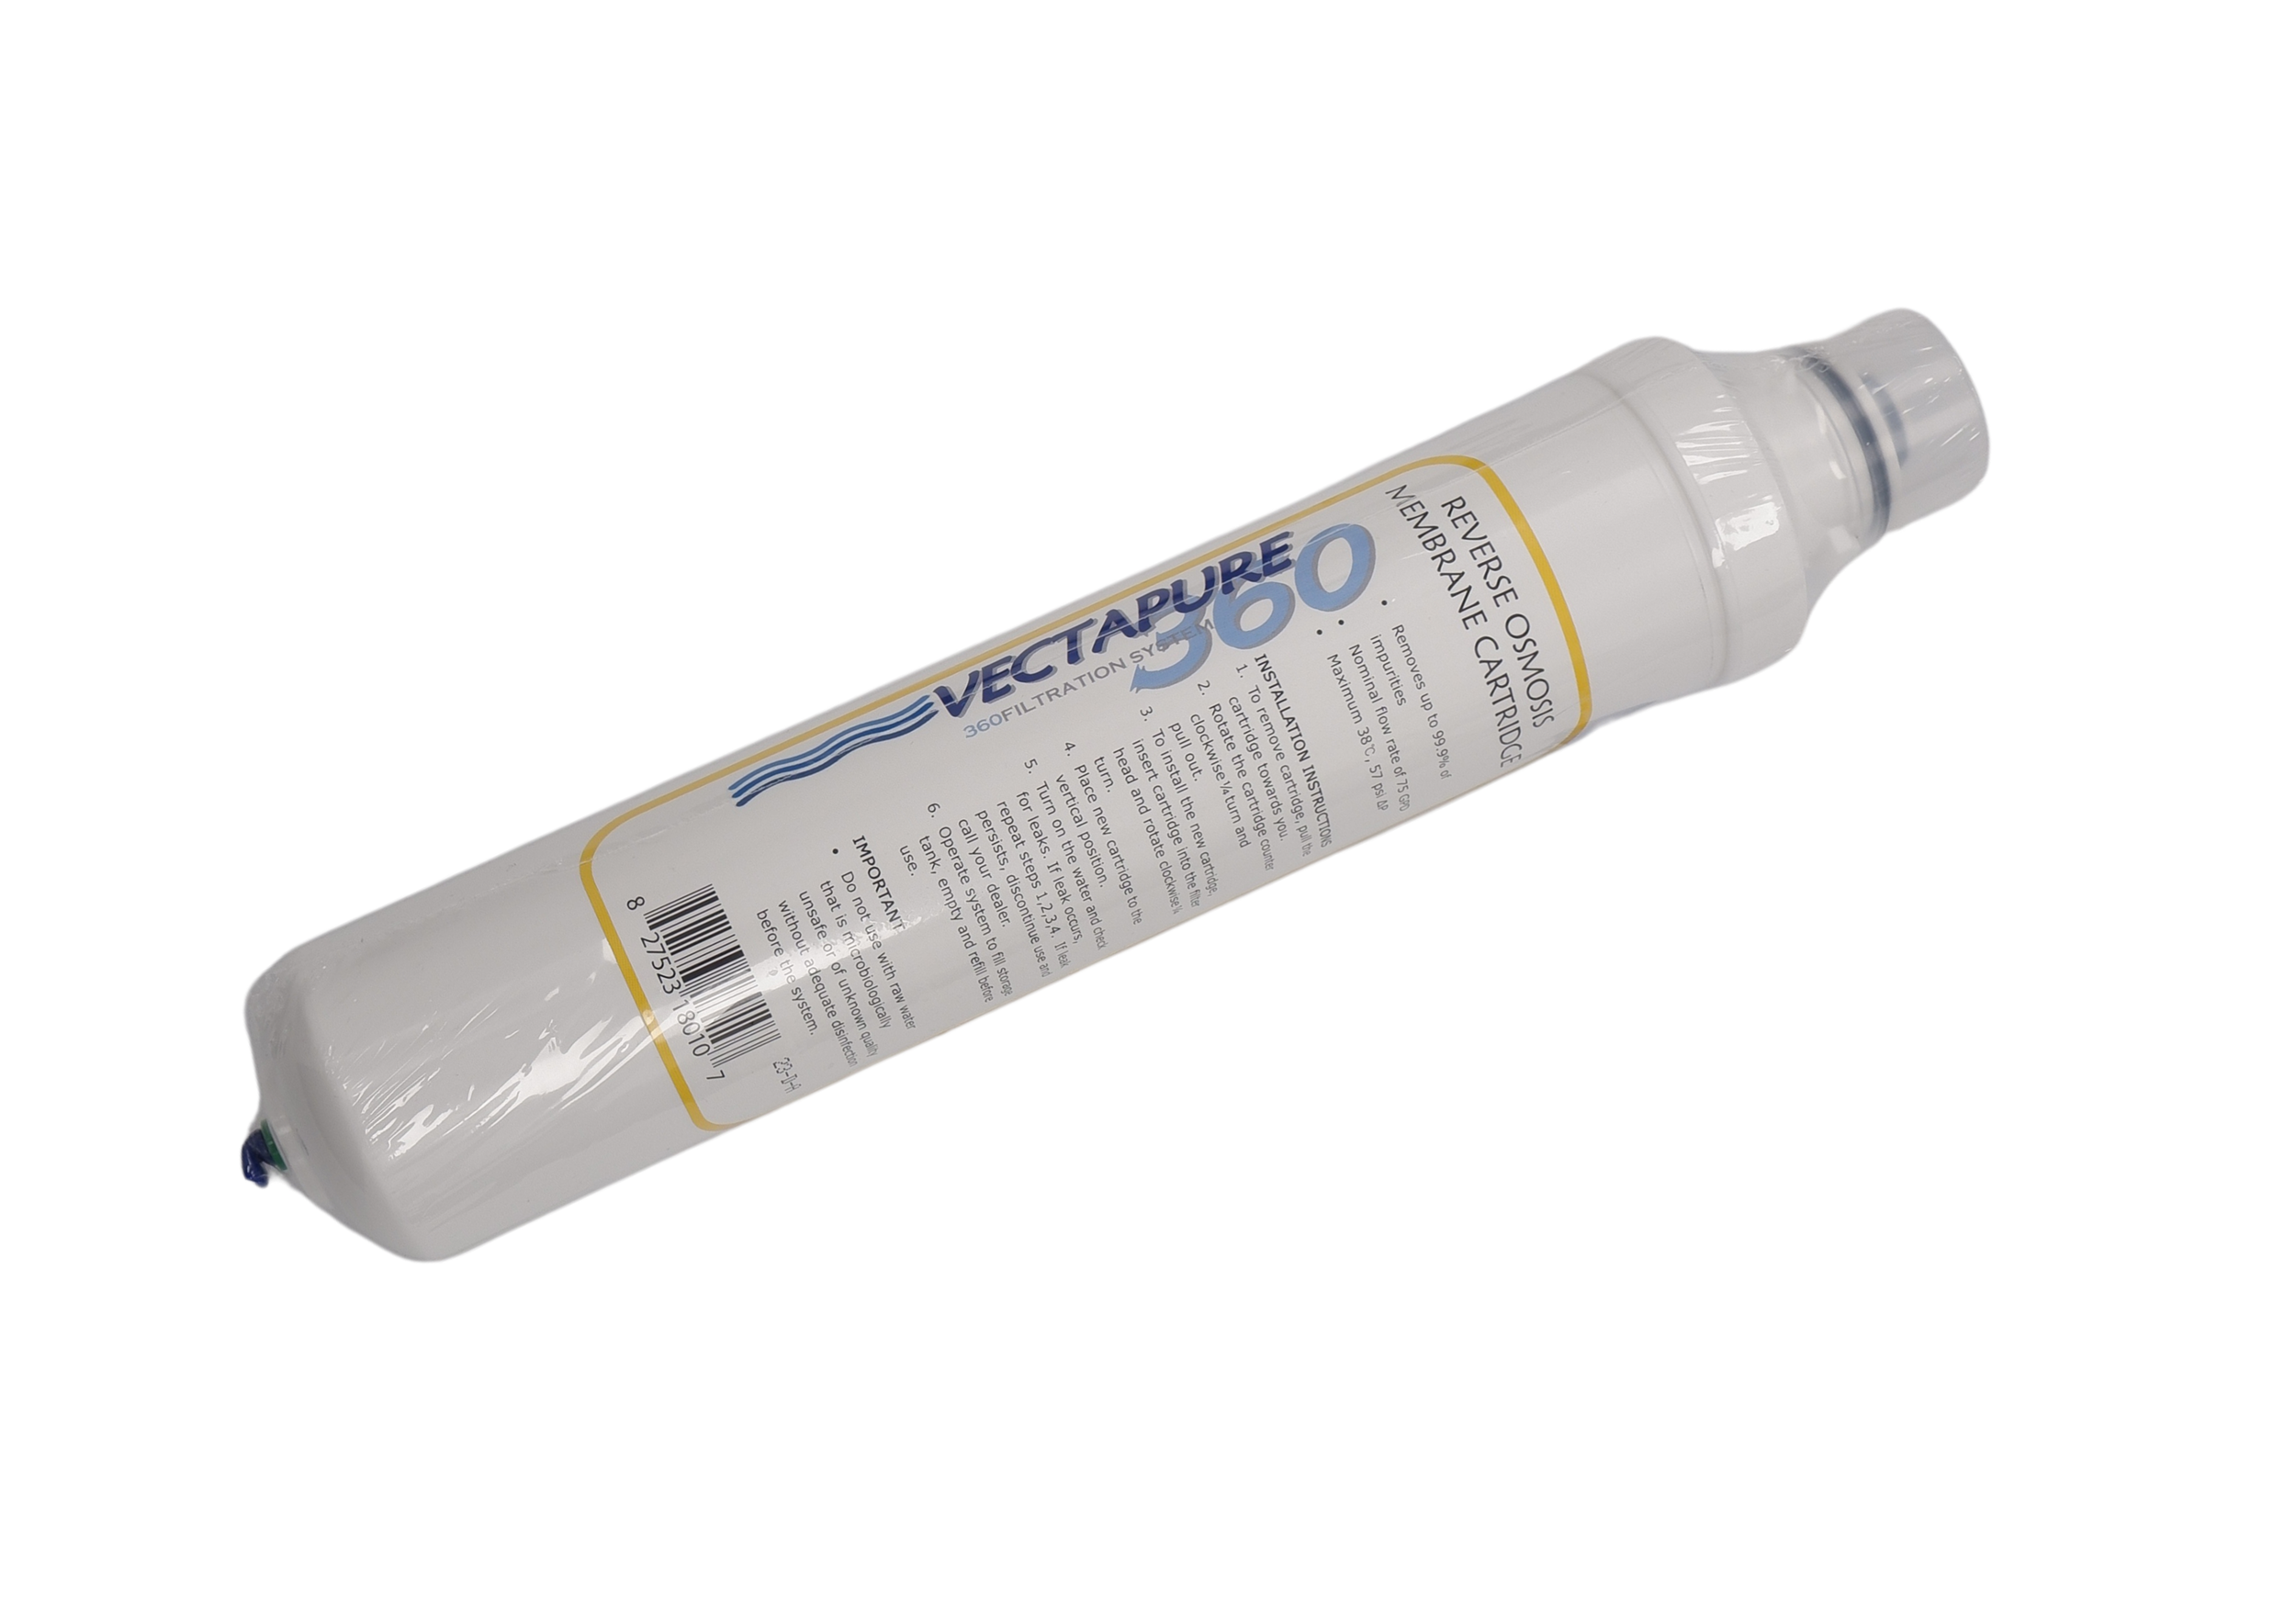 Vectapure 360 Yellow Replacement R/O Membrane Cartridge